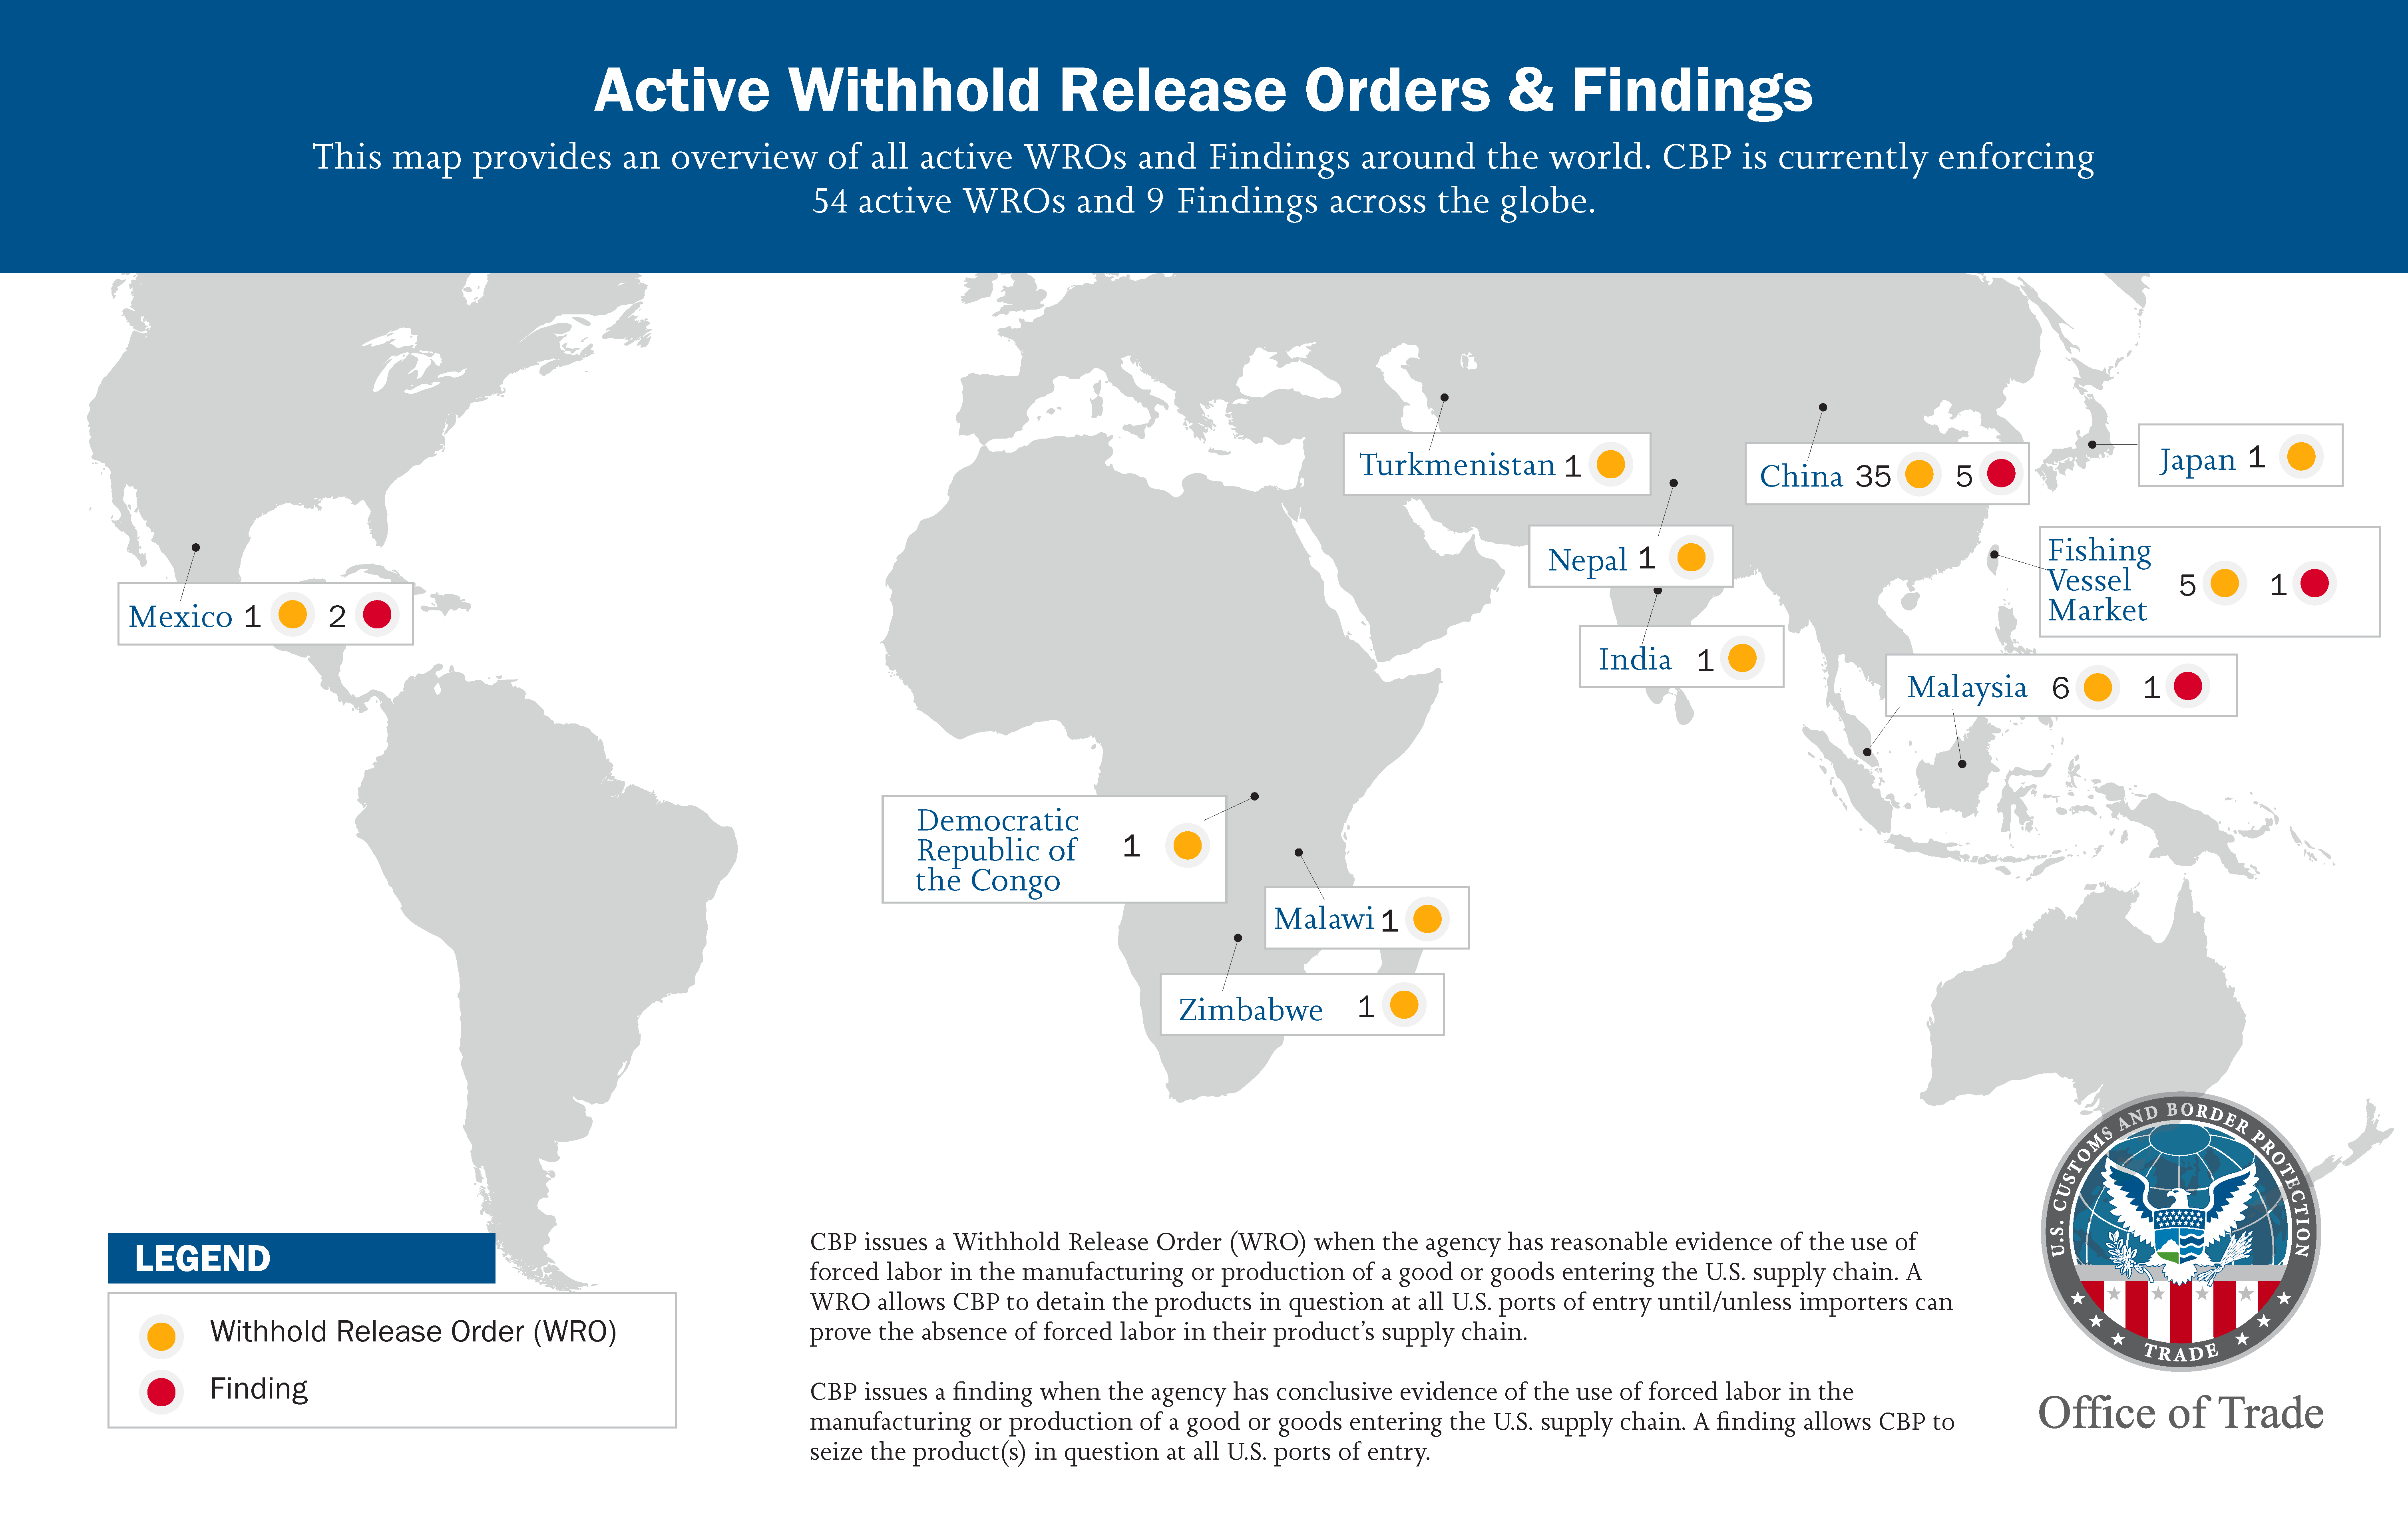 Active Withhold Release Orders & Findings. This map provides an overview of all active WROs and Findings around the world. CBP is currently enforcing 54 active WROs and 9 Findings across the globe. CBP issues a Withhold Release Order (WRO) when the agency has reasonable evidence of the use of forced labor in the manufacturing or production of a good or goods entering the U.S. supply chain. A WRO allows CBP to detain the products in question at all U.S. ports of entry until/unless importers can prove the abs